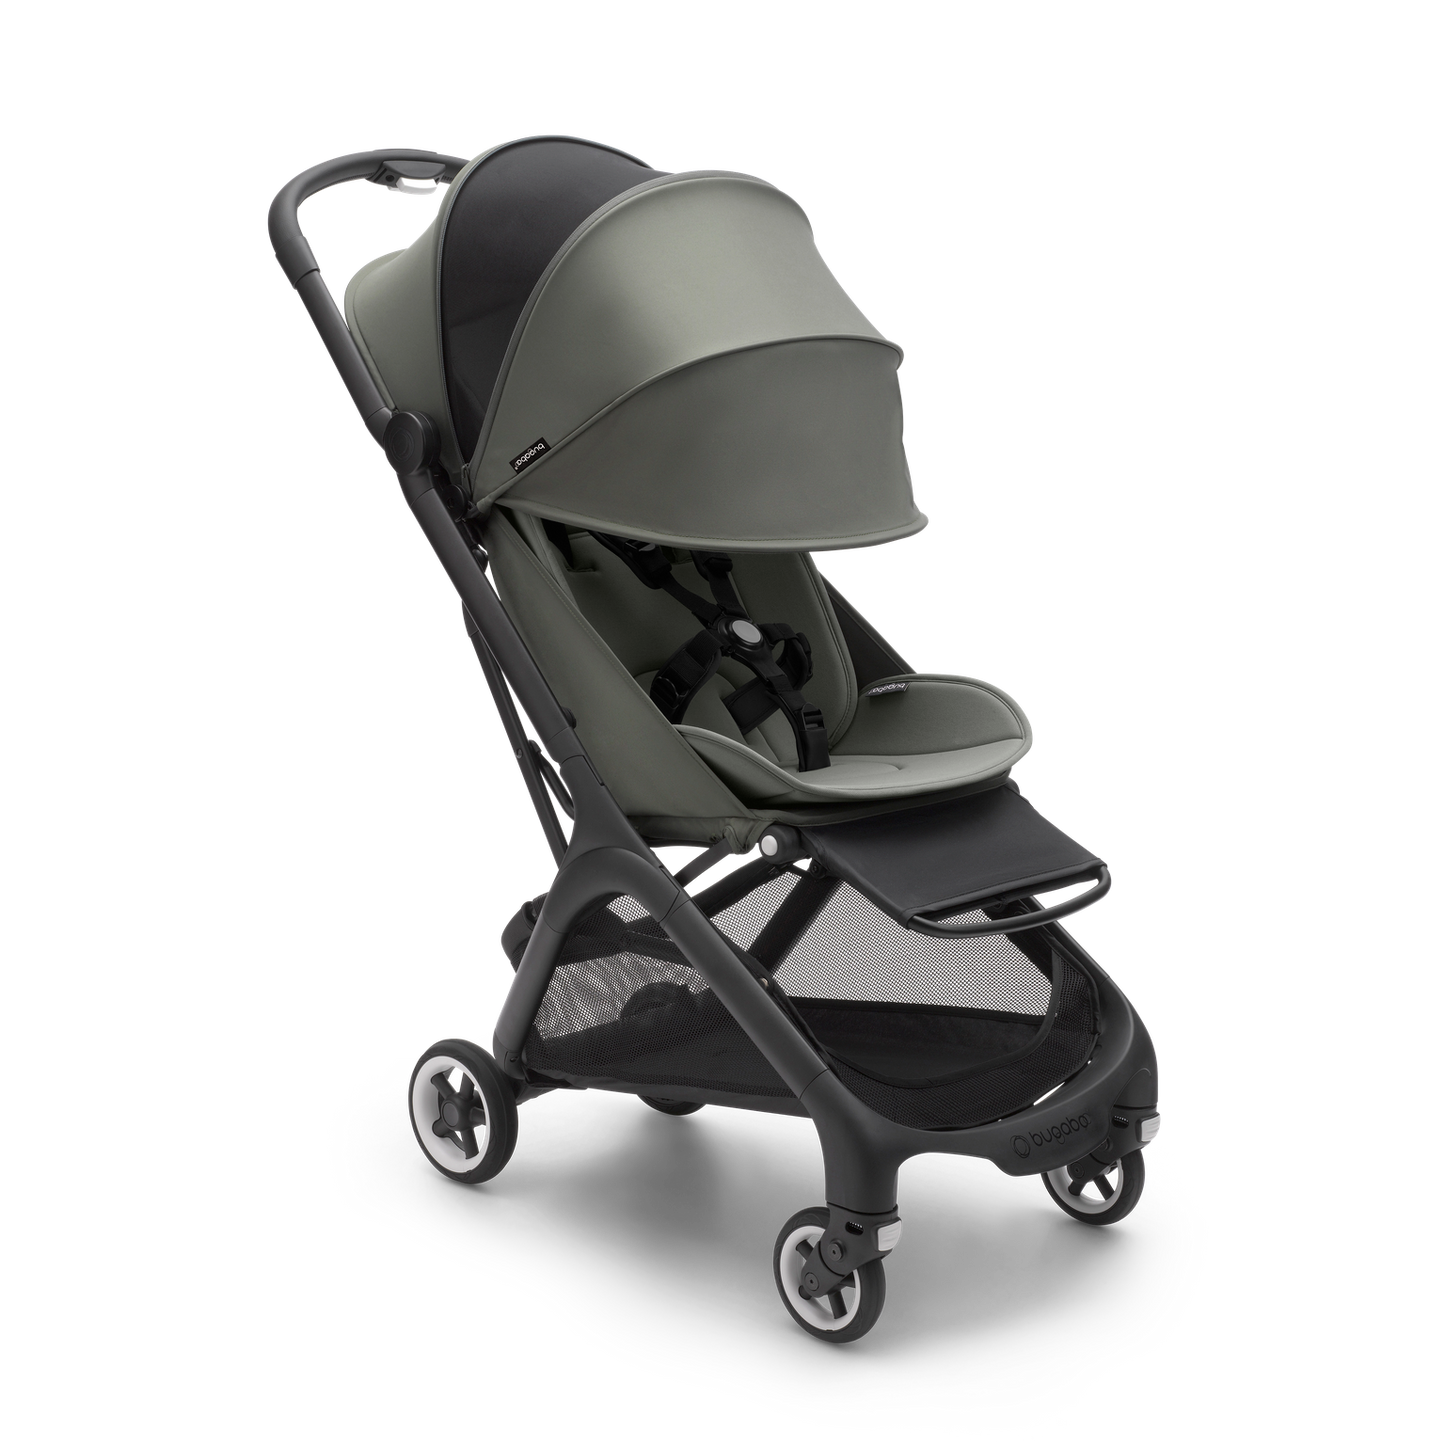 Bugaboo Butterfly Compact Stroller | Forest Green | Travel Lightweight Buggy | Canopy